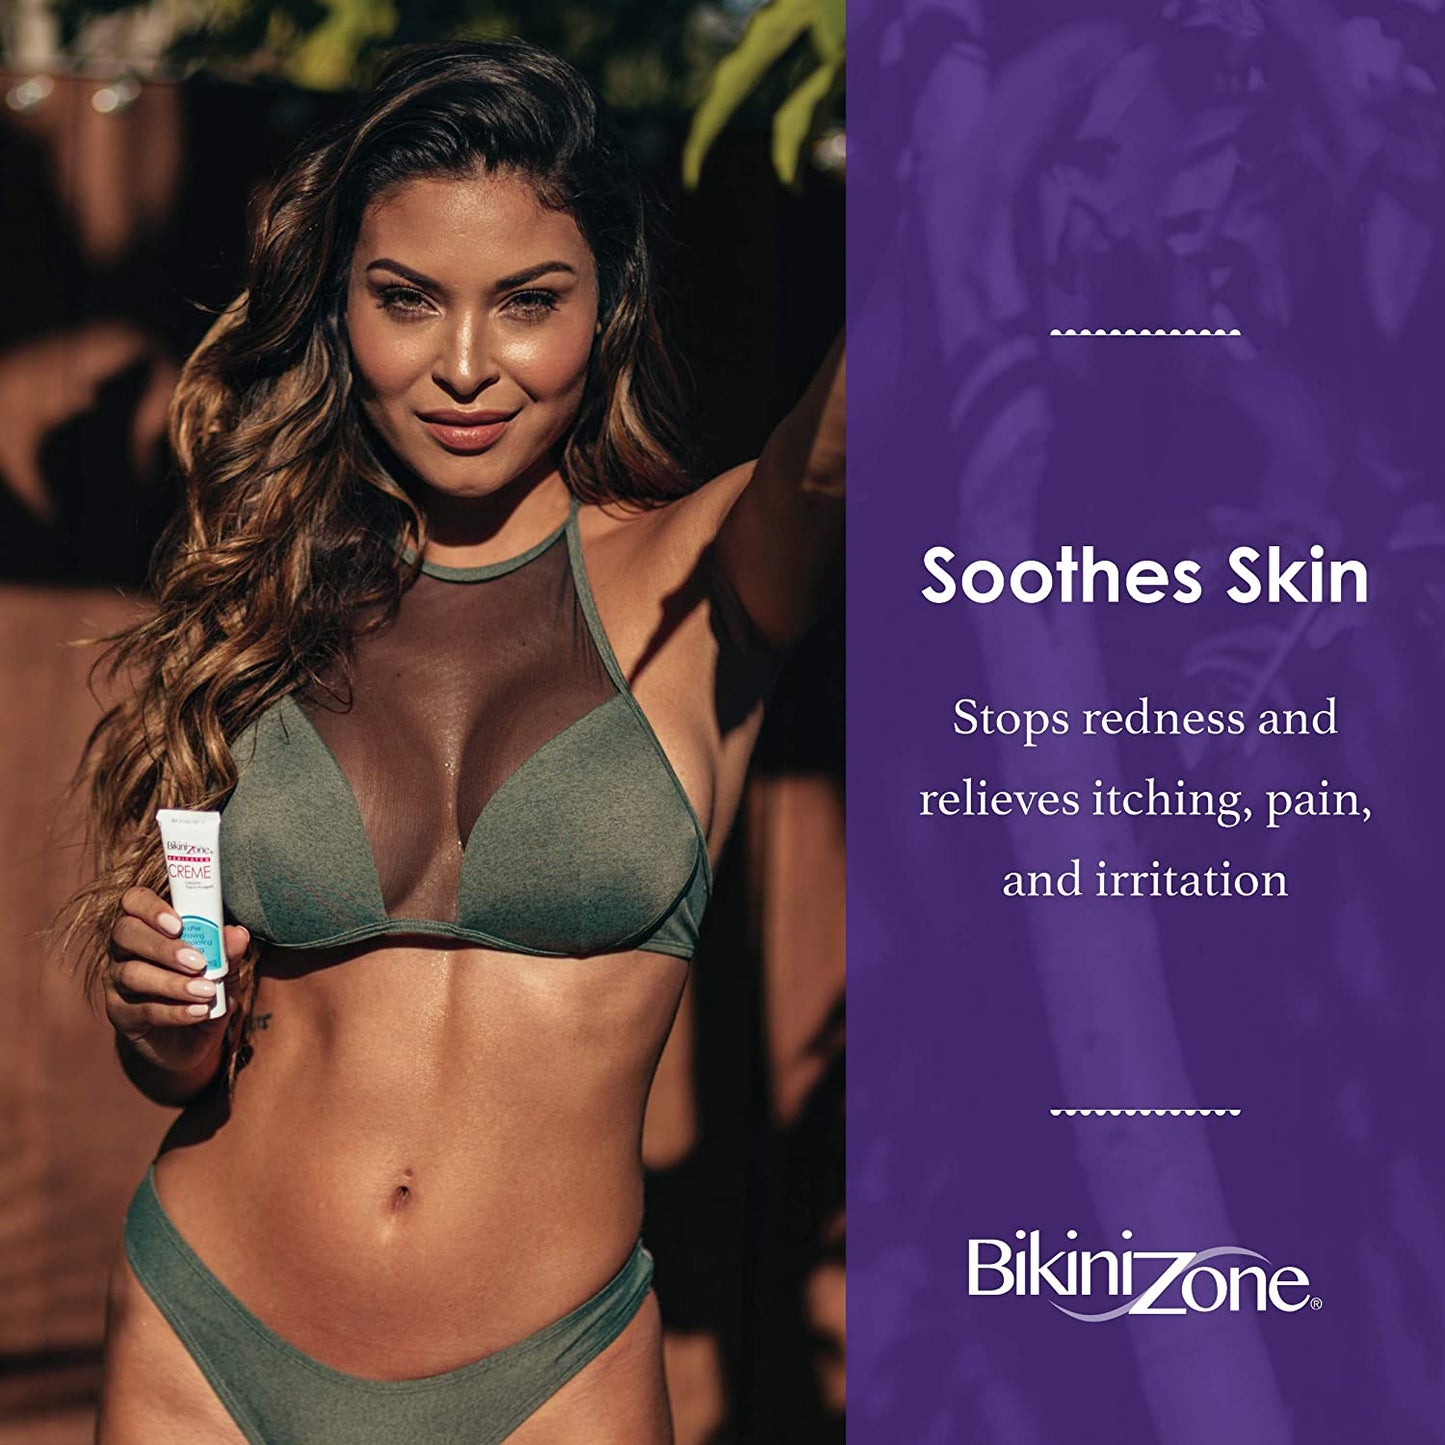 Bikini Zone Medicated After Shave Gel